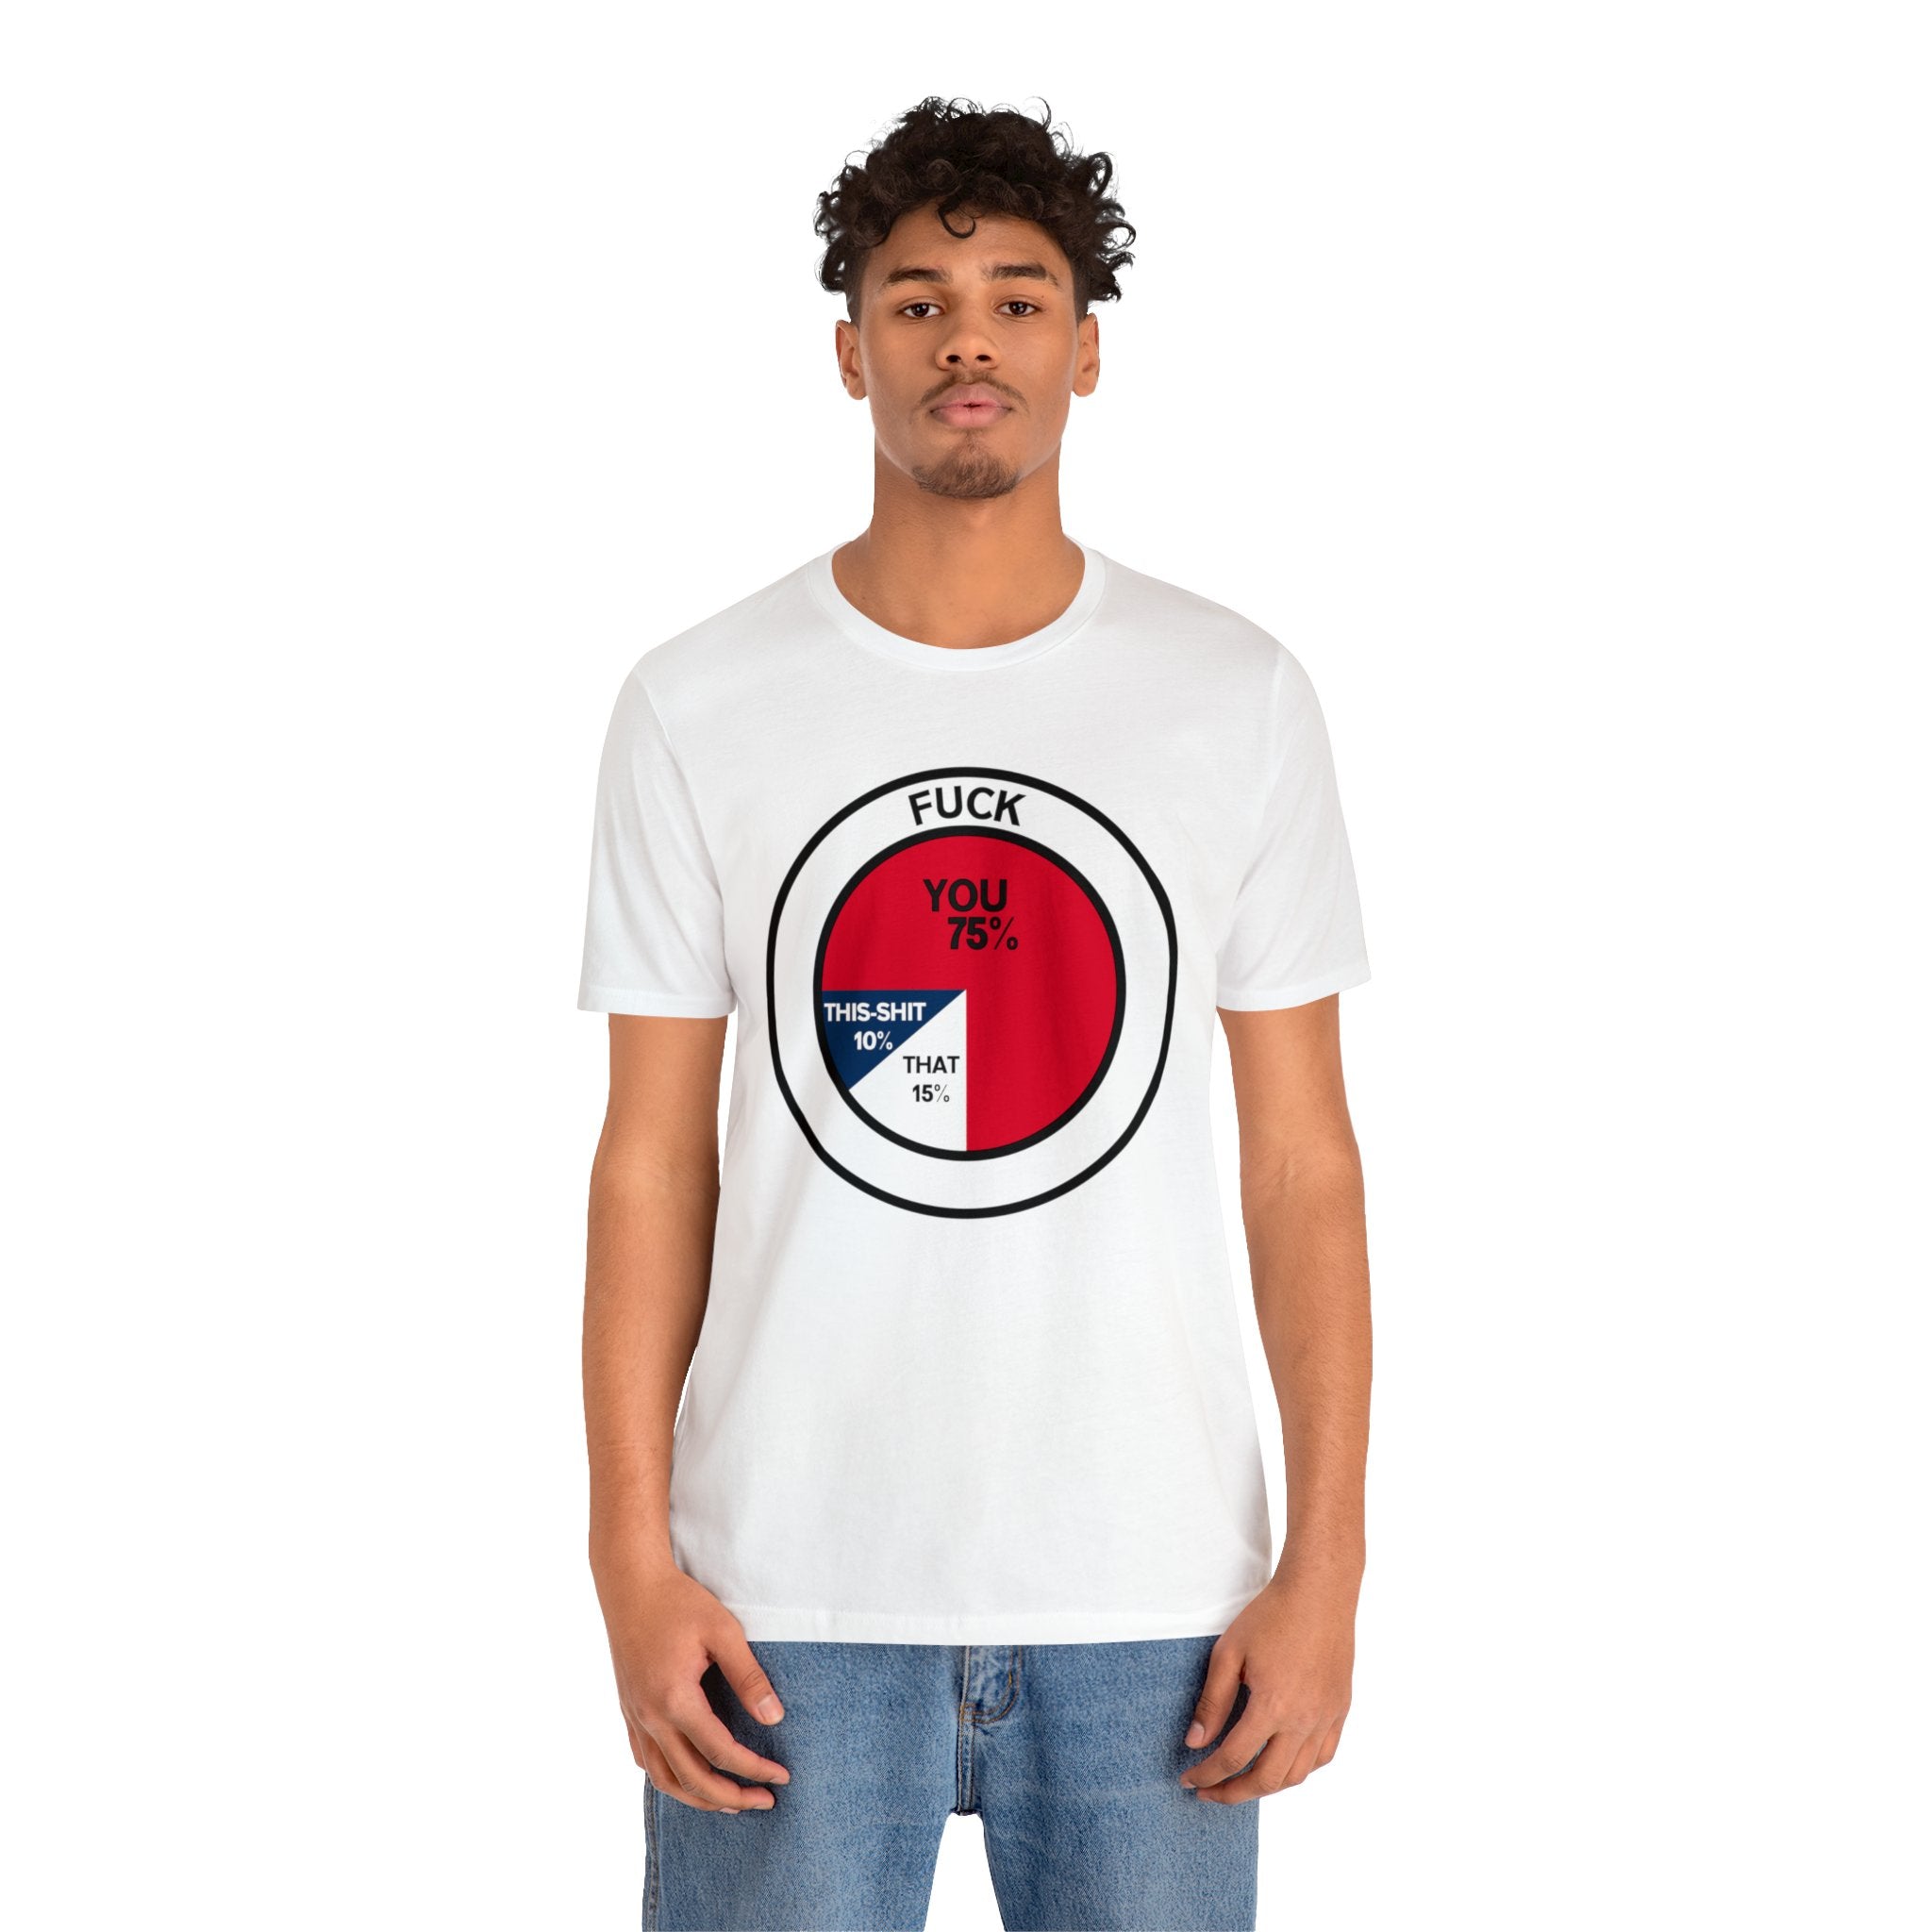 Order a True Statistic T-Shirt with a red and blue circle today.